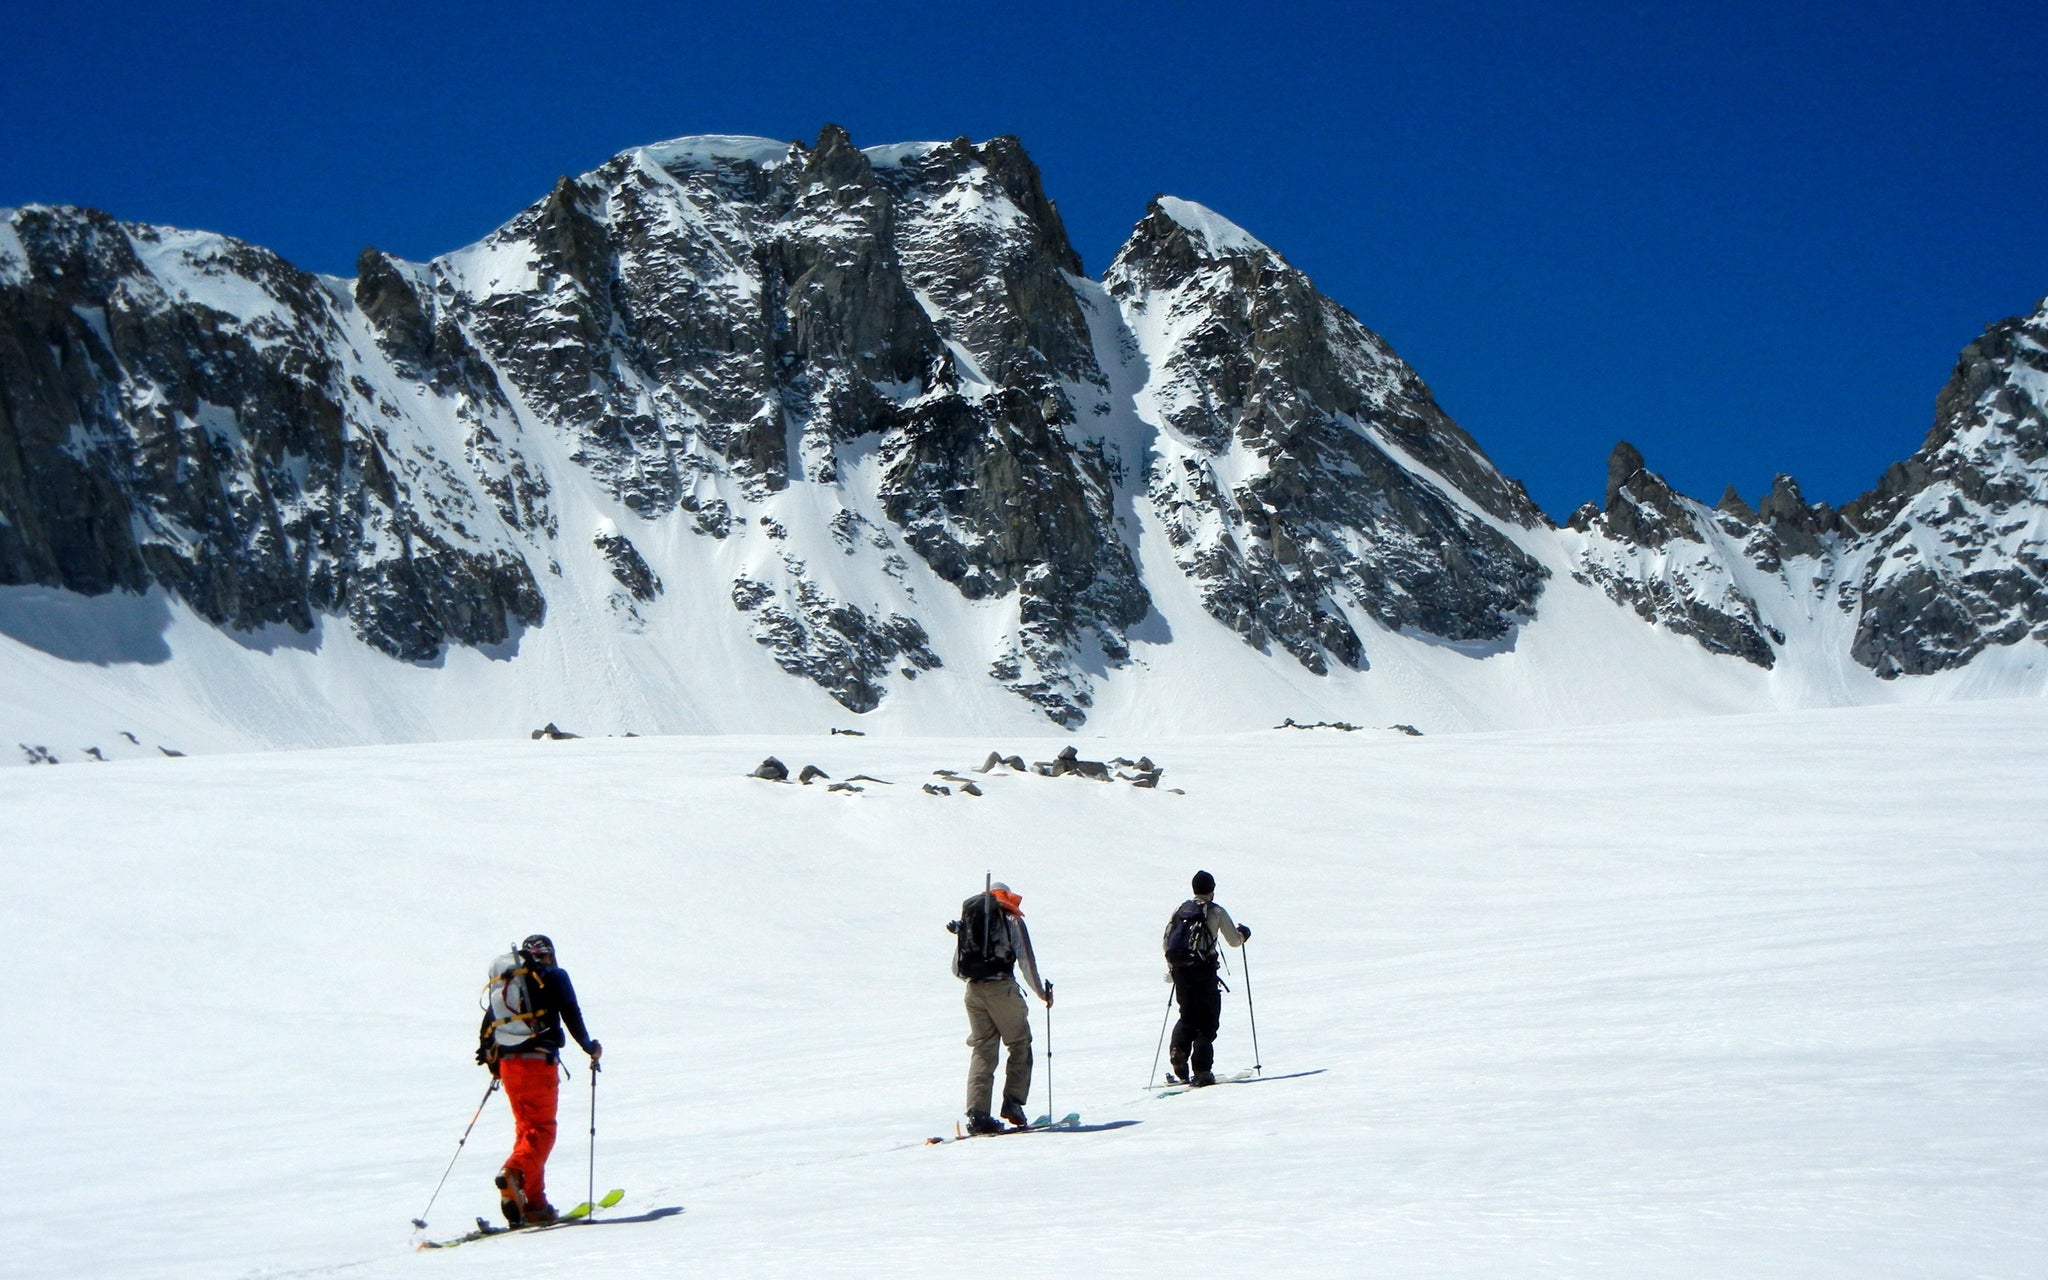 A team ski mountaineering across a snowfield on the way to ski Mount Johnson in the Eastern Sierra